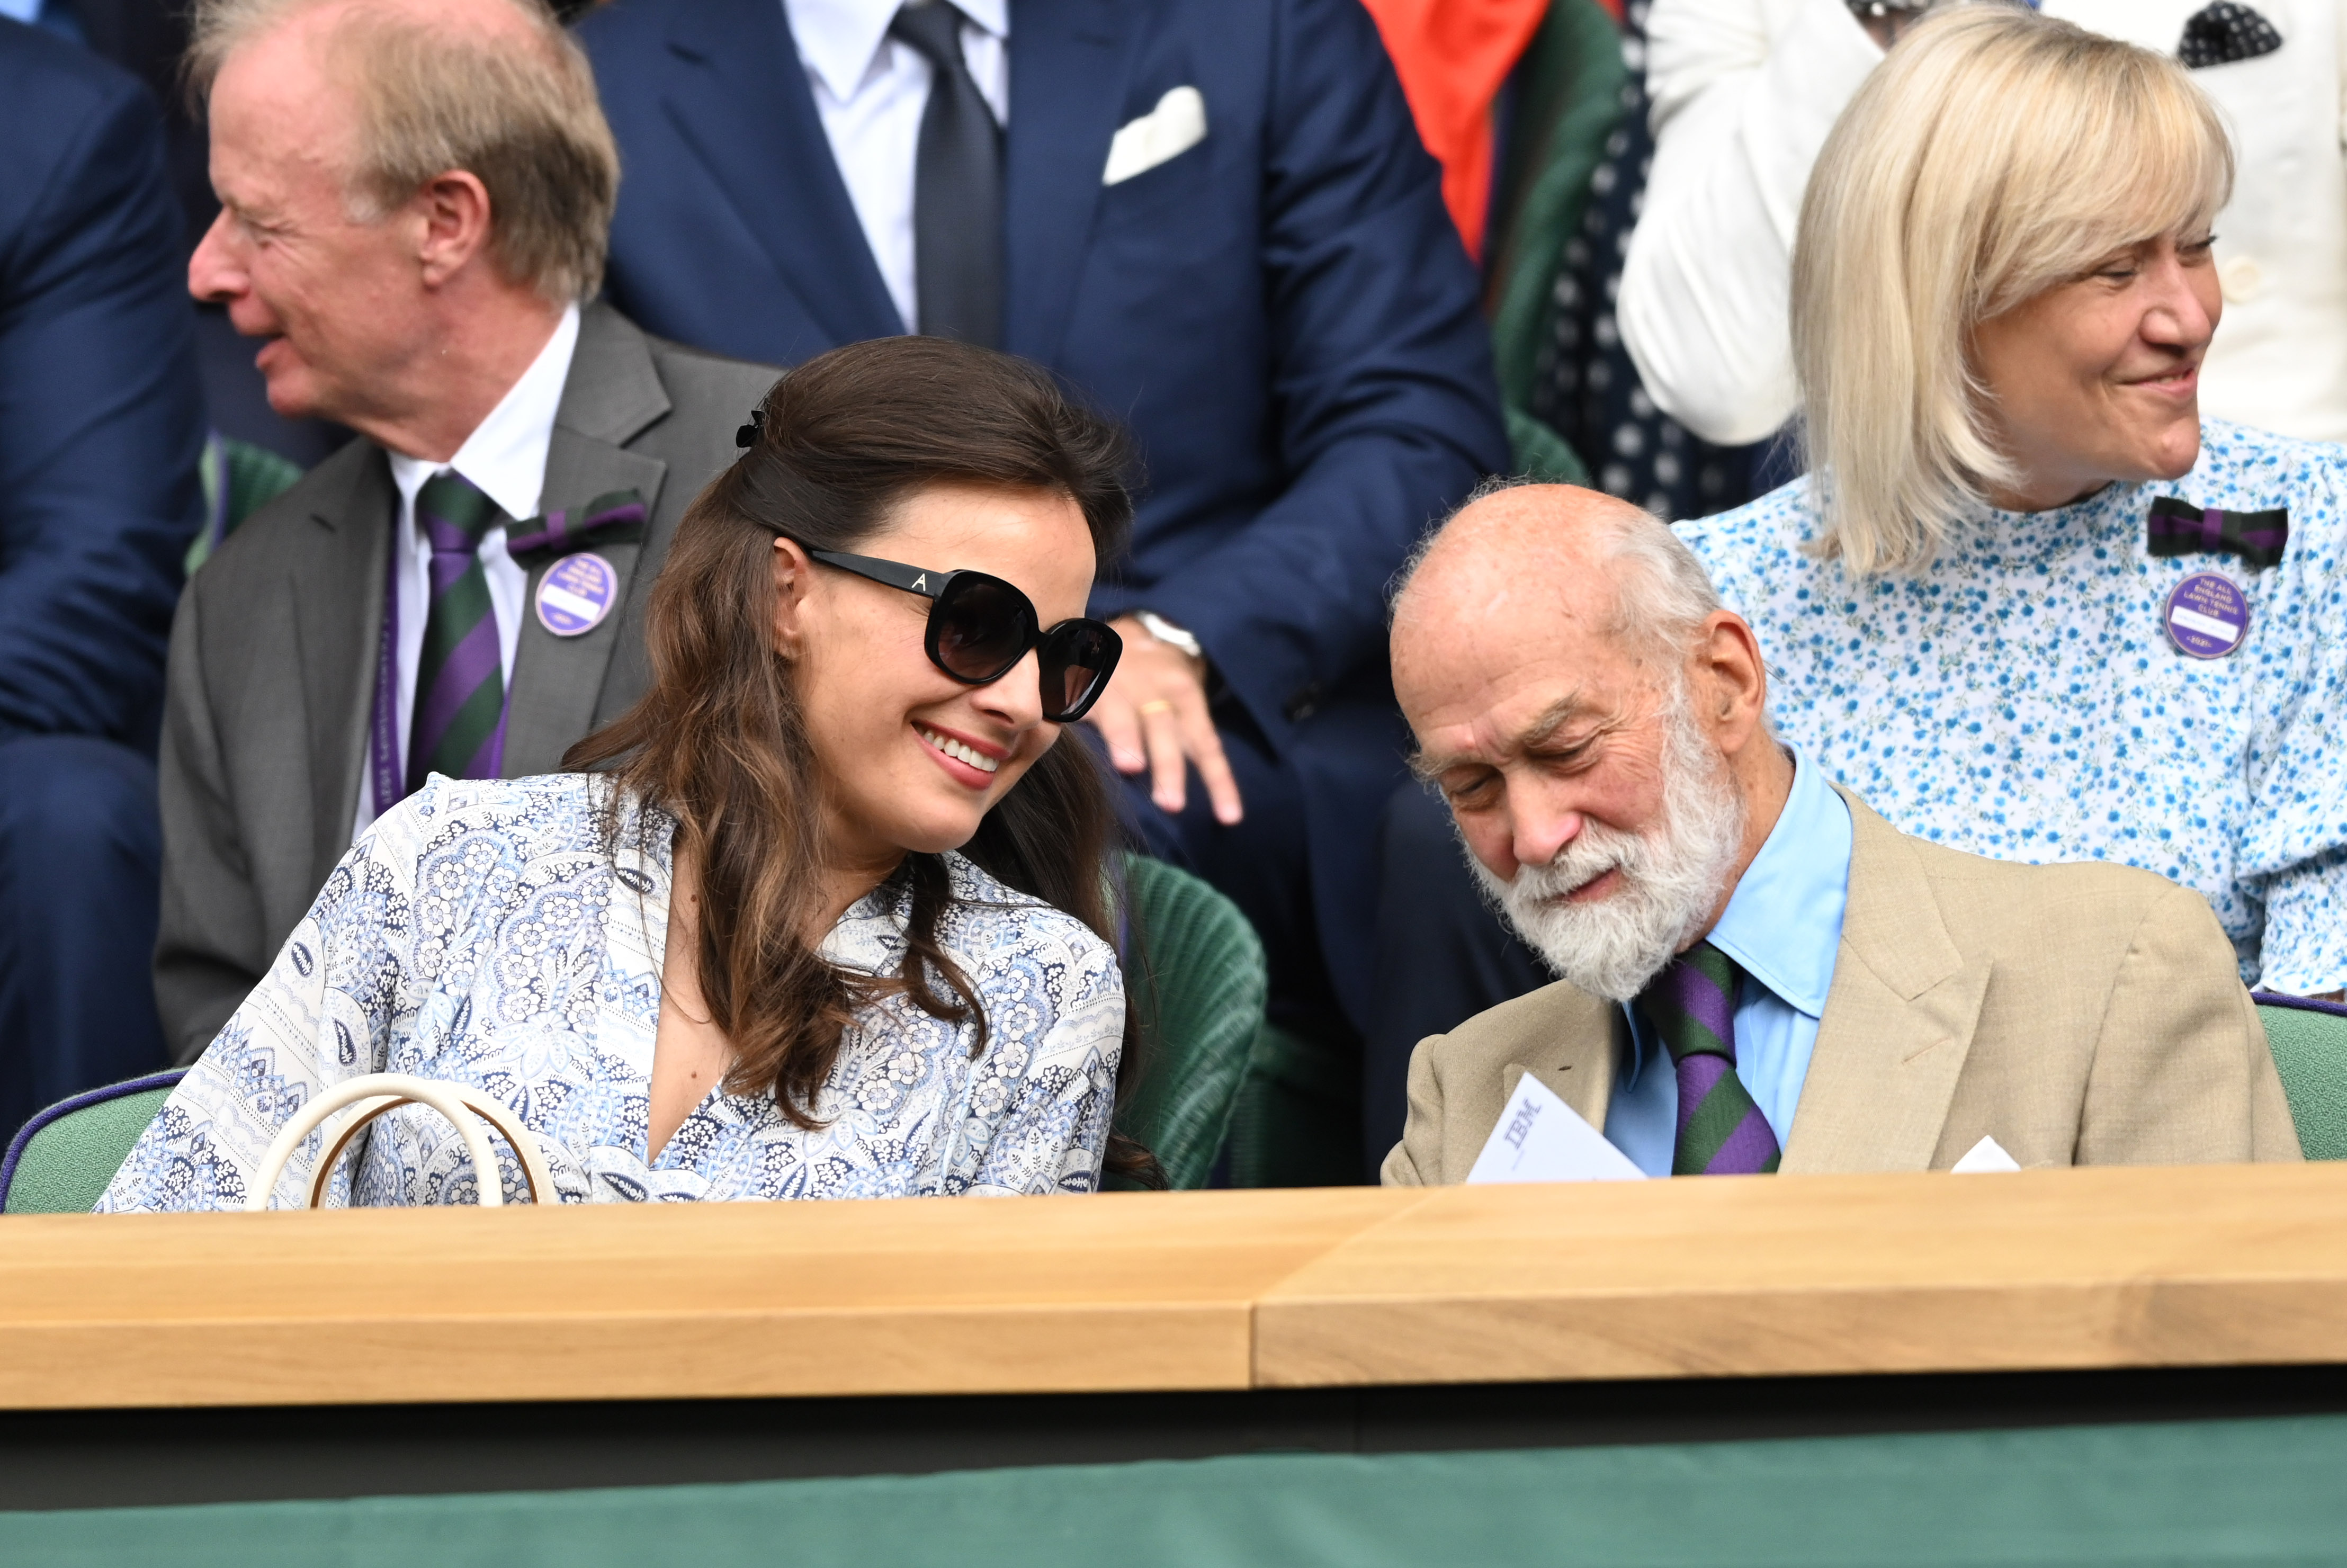 Wimbledon tennis championships 2021: All the celebs and royals in